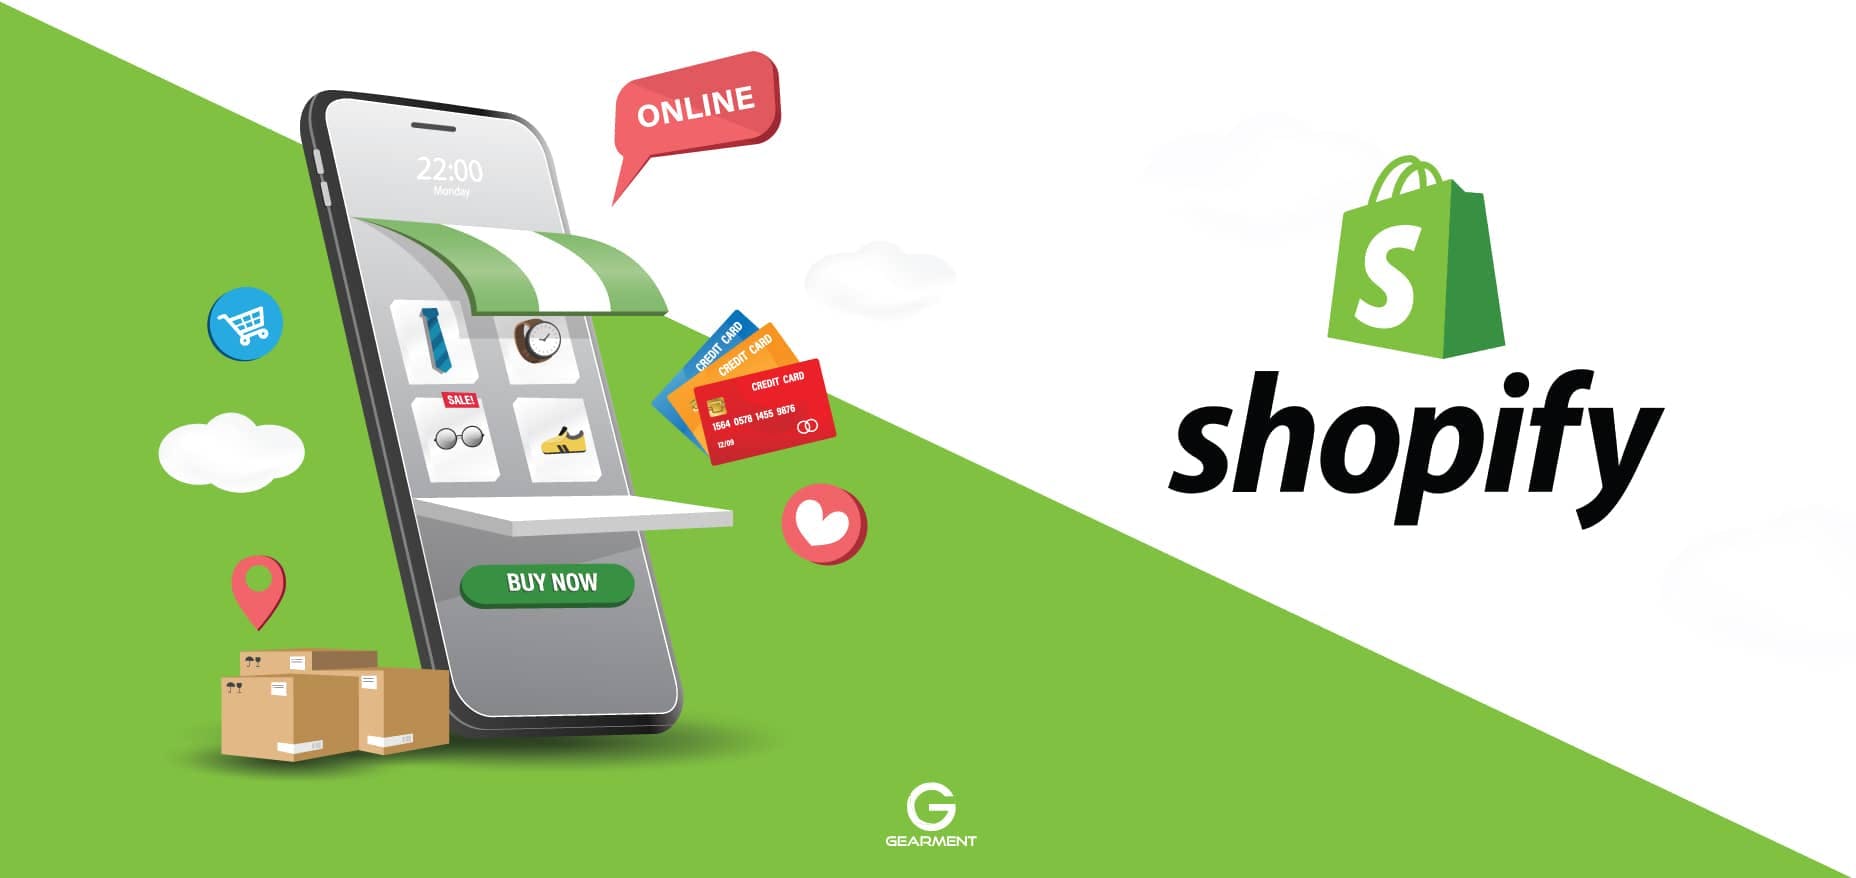 How to Use Shopify?